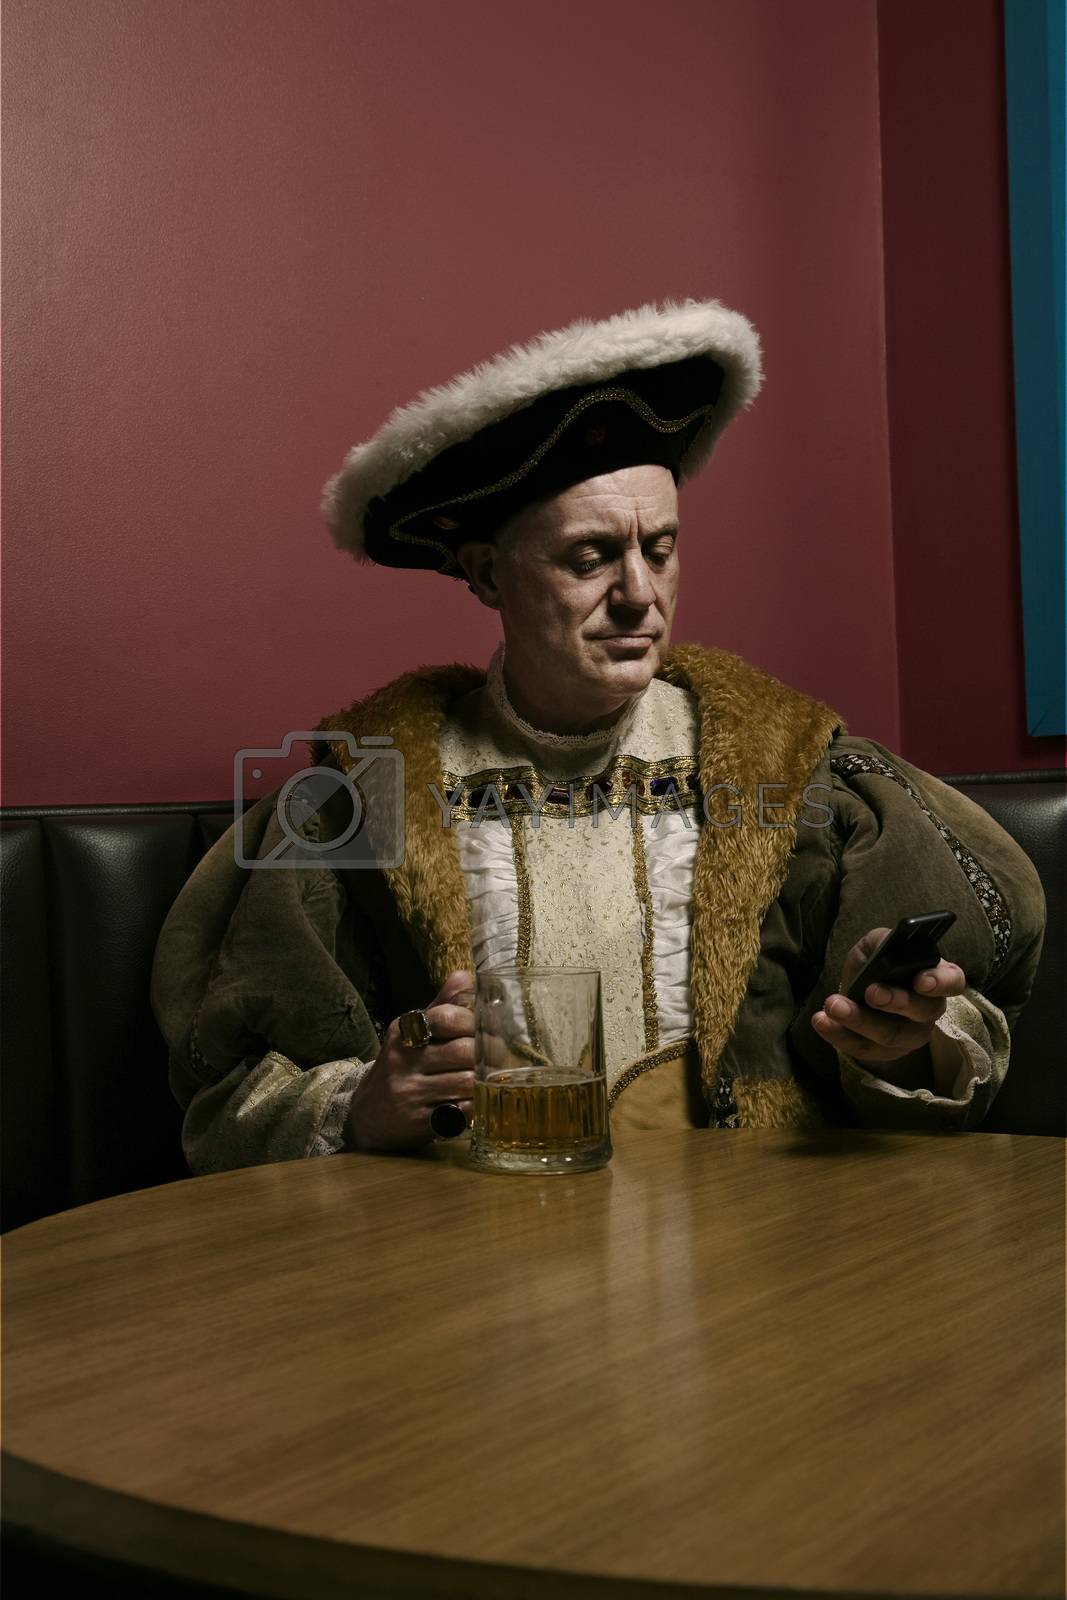 Royalty free image of King Henry VIII using mobile phone at table by moodboard